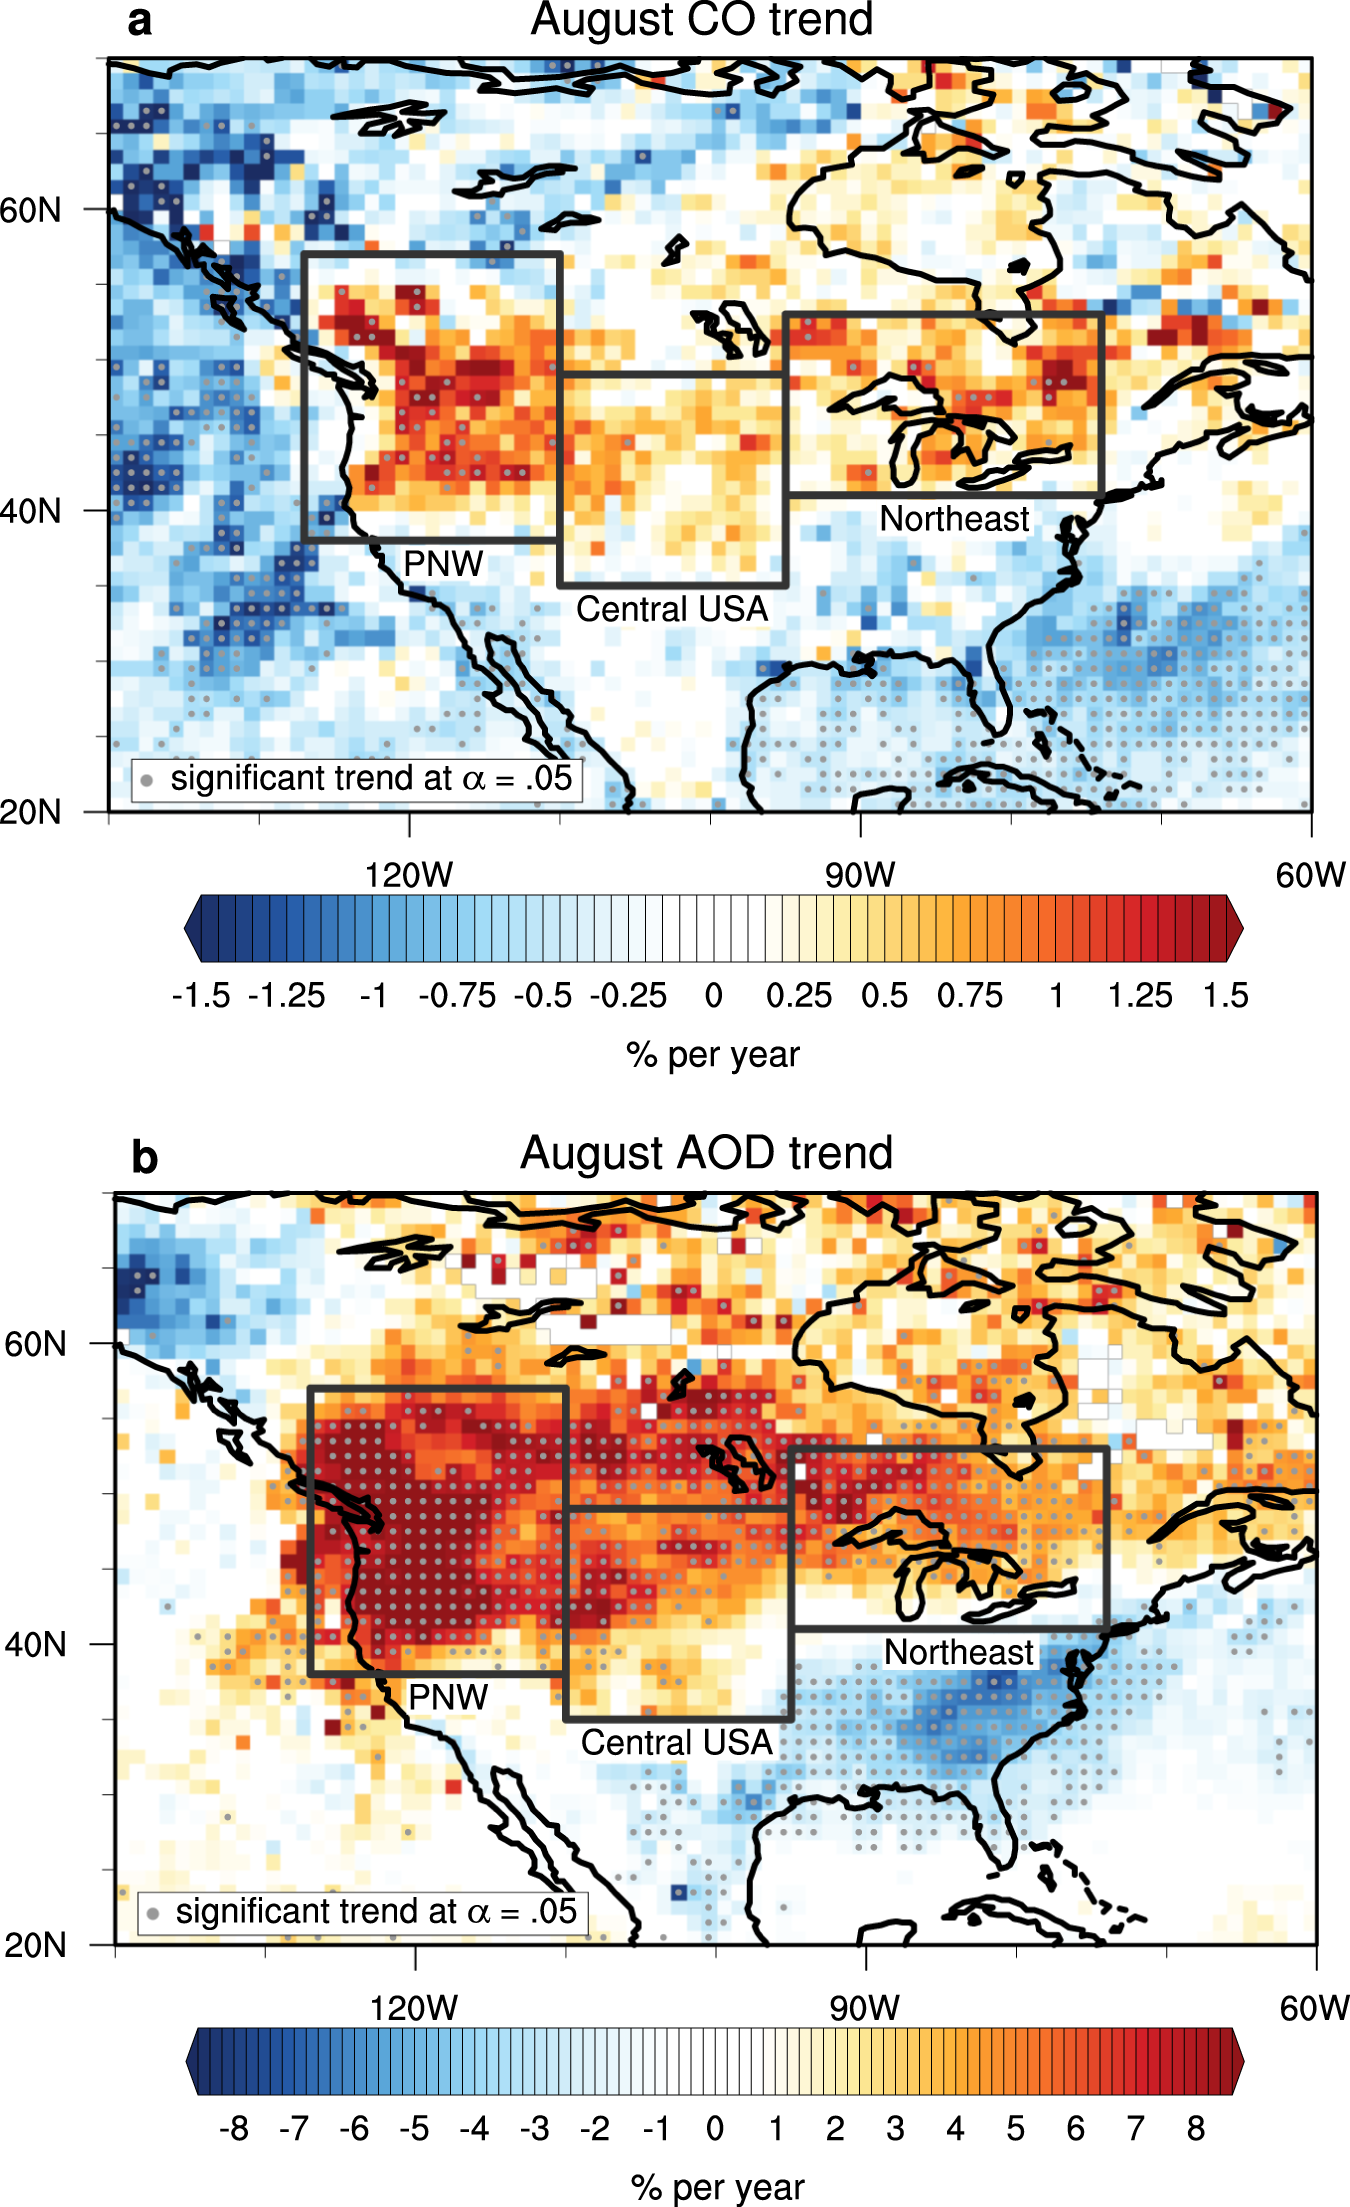 New seasonal pattern of pollution emerges from changing North American  wildfires | Nature Communications